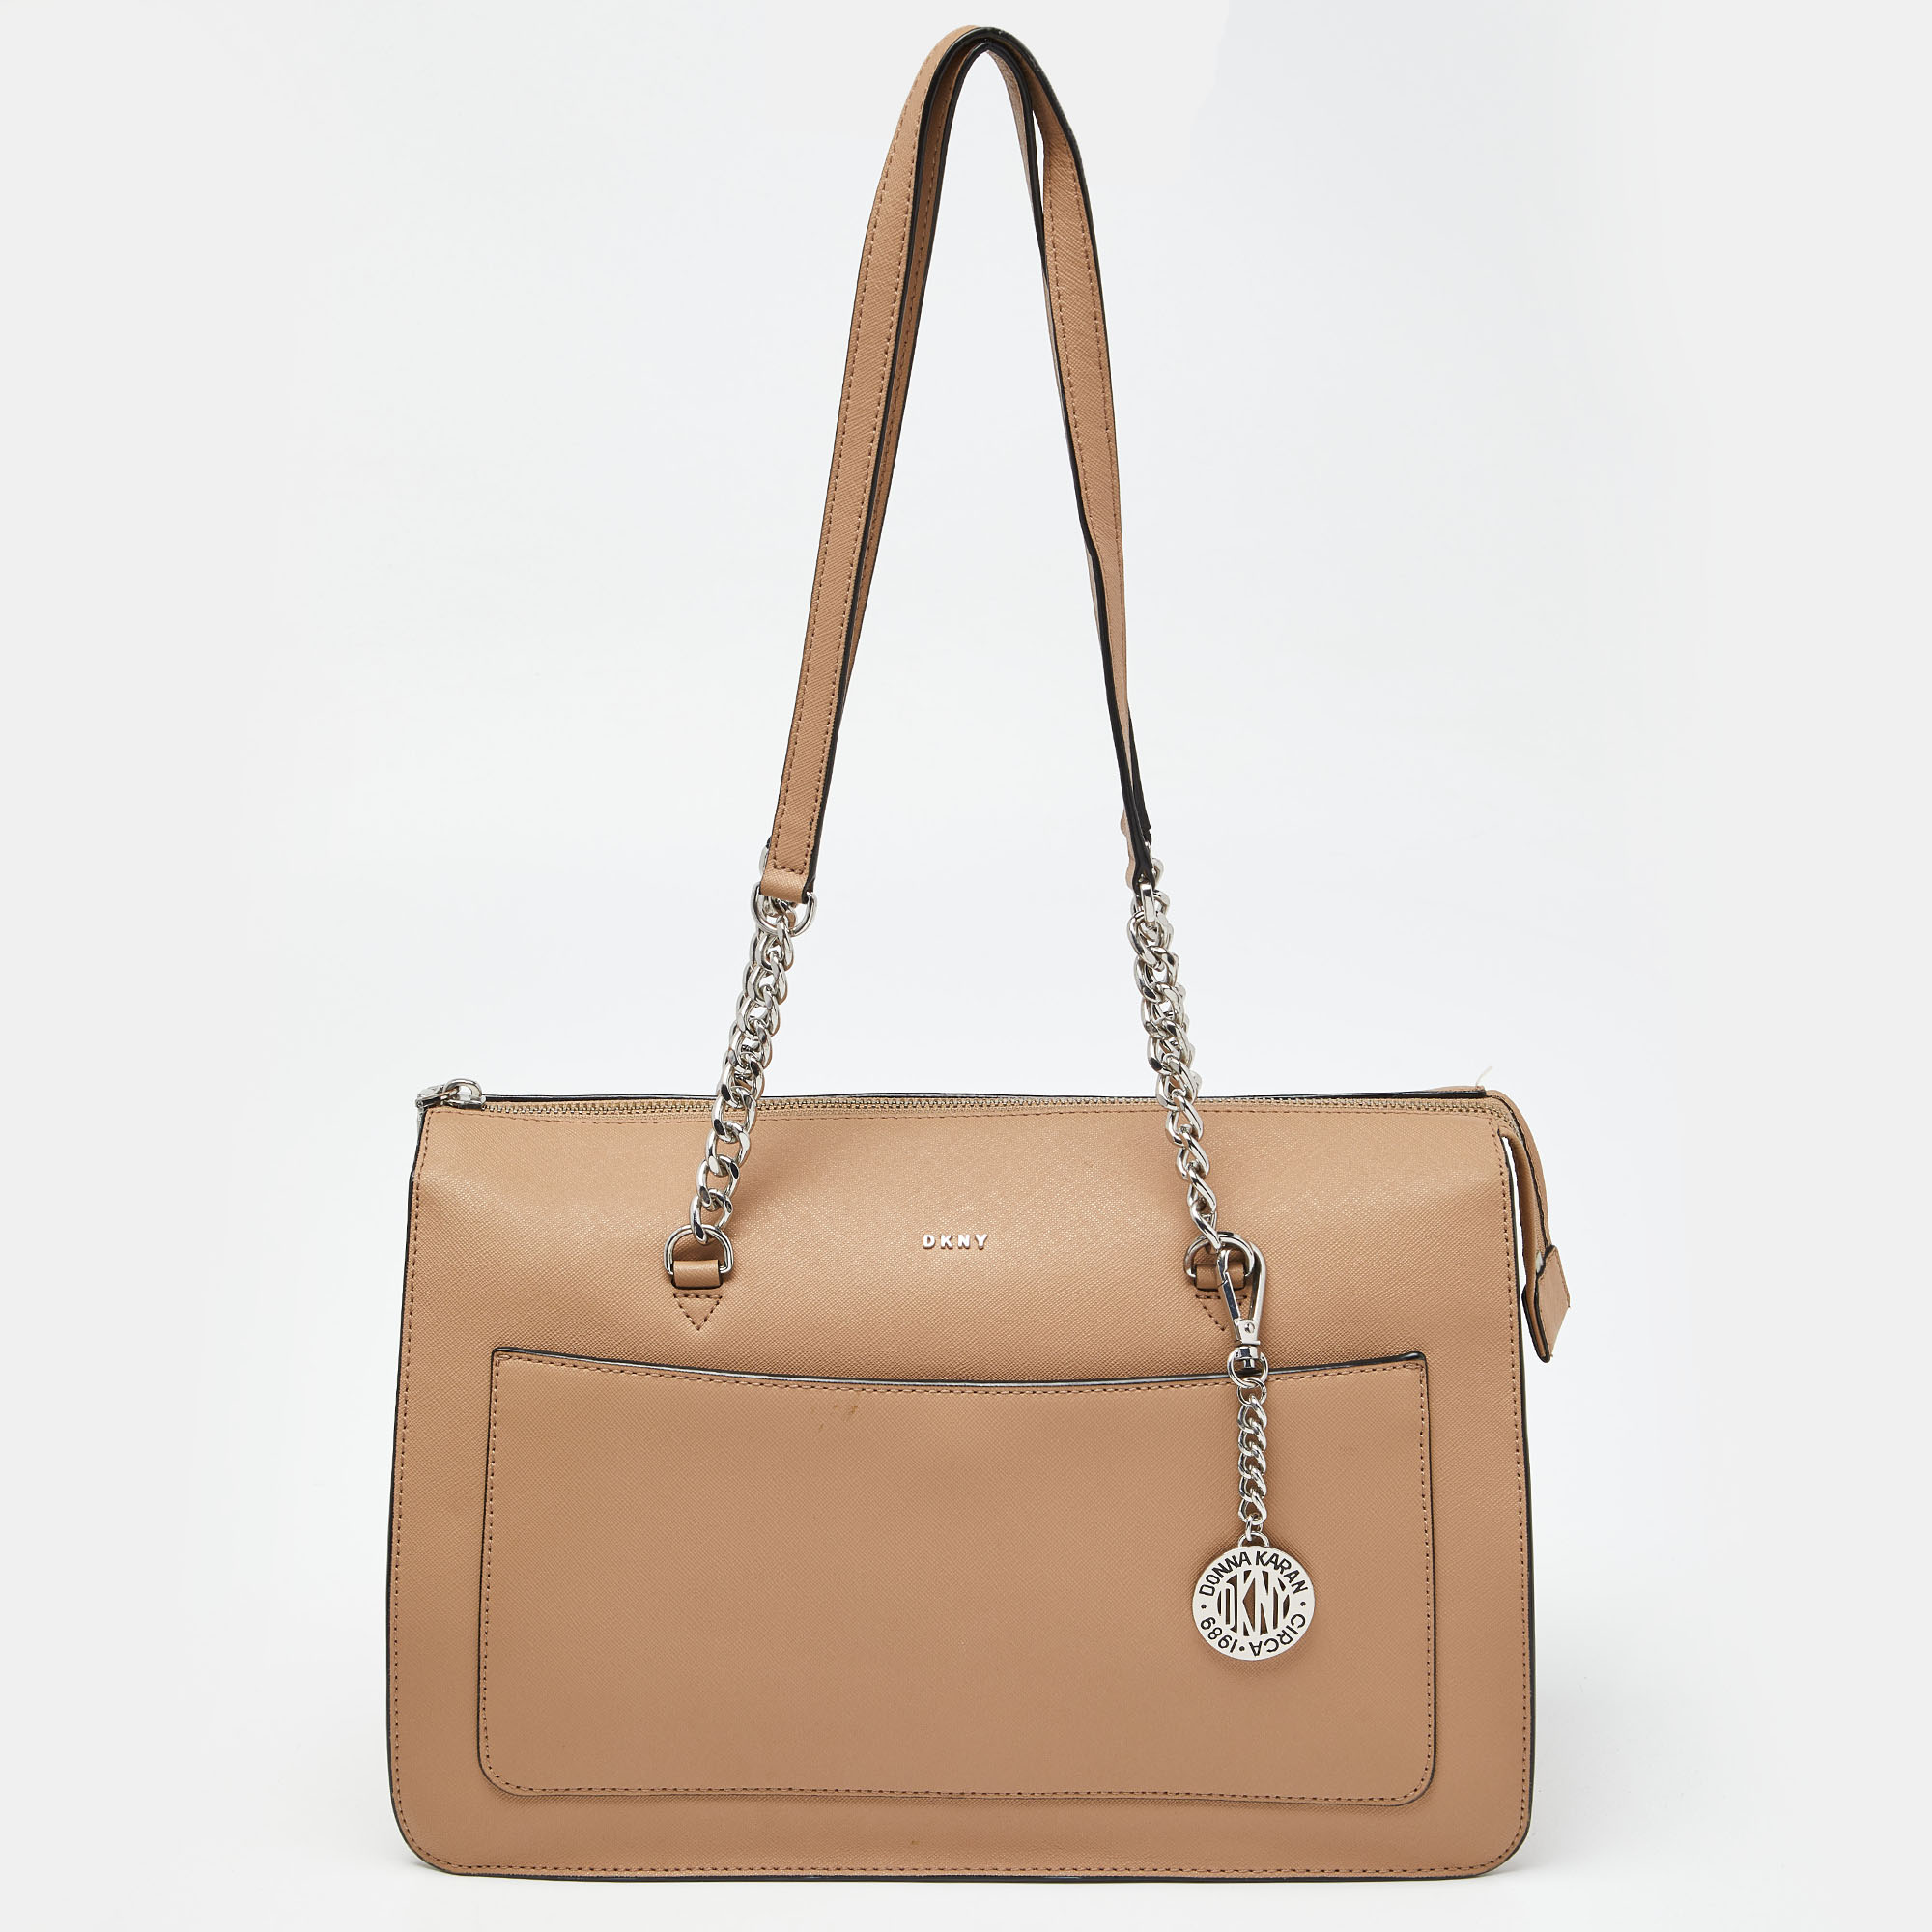 Dkny beige leather large bryant chain zip tote